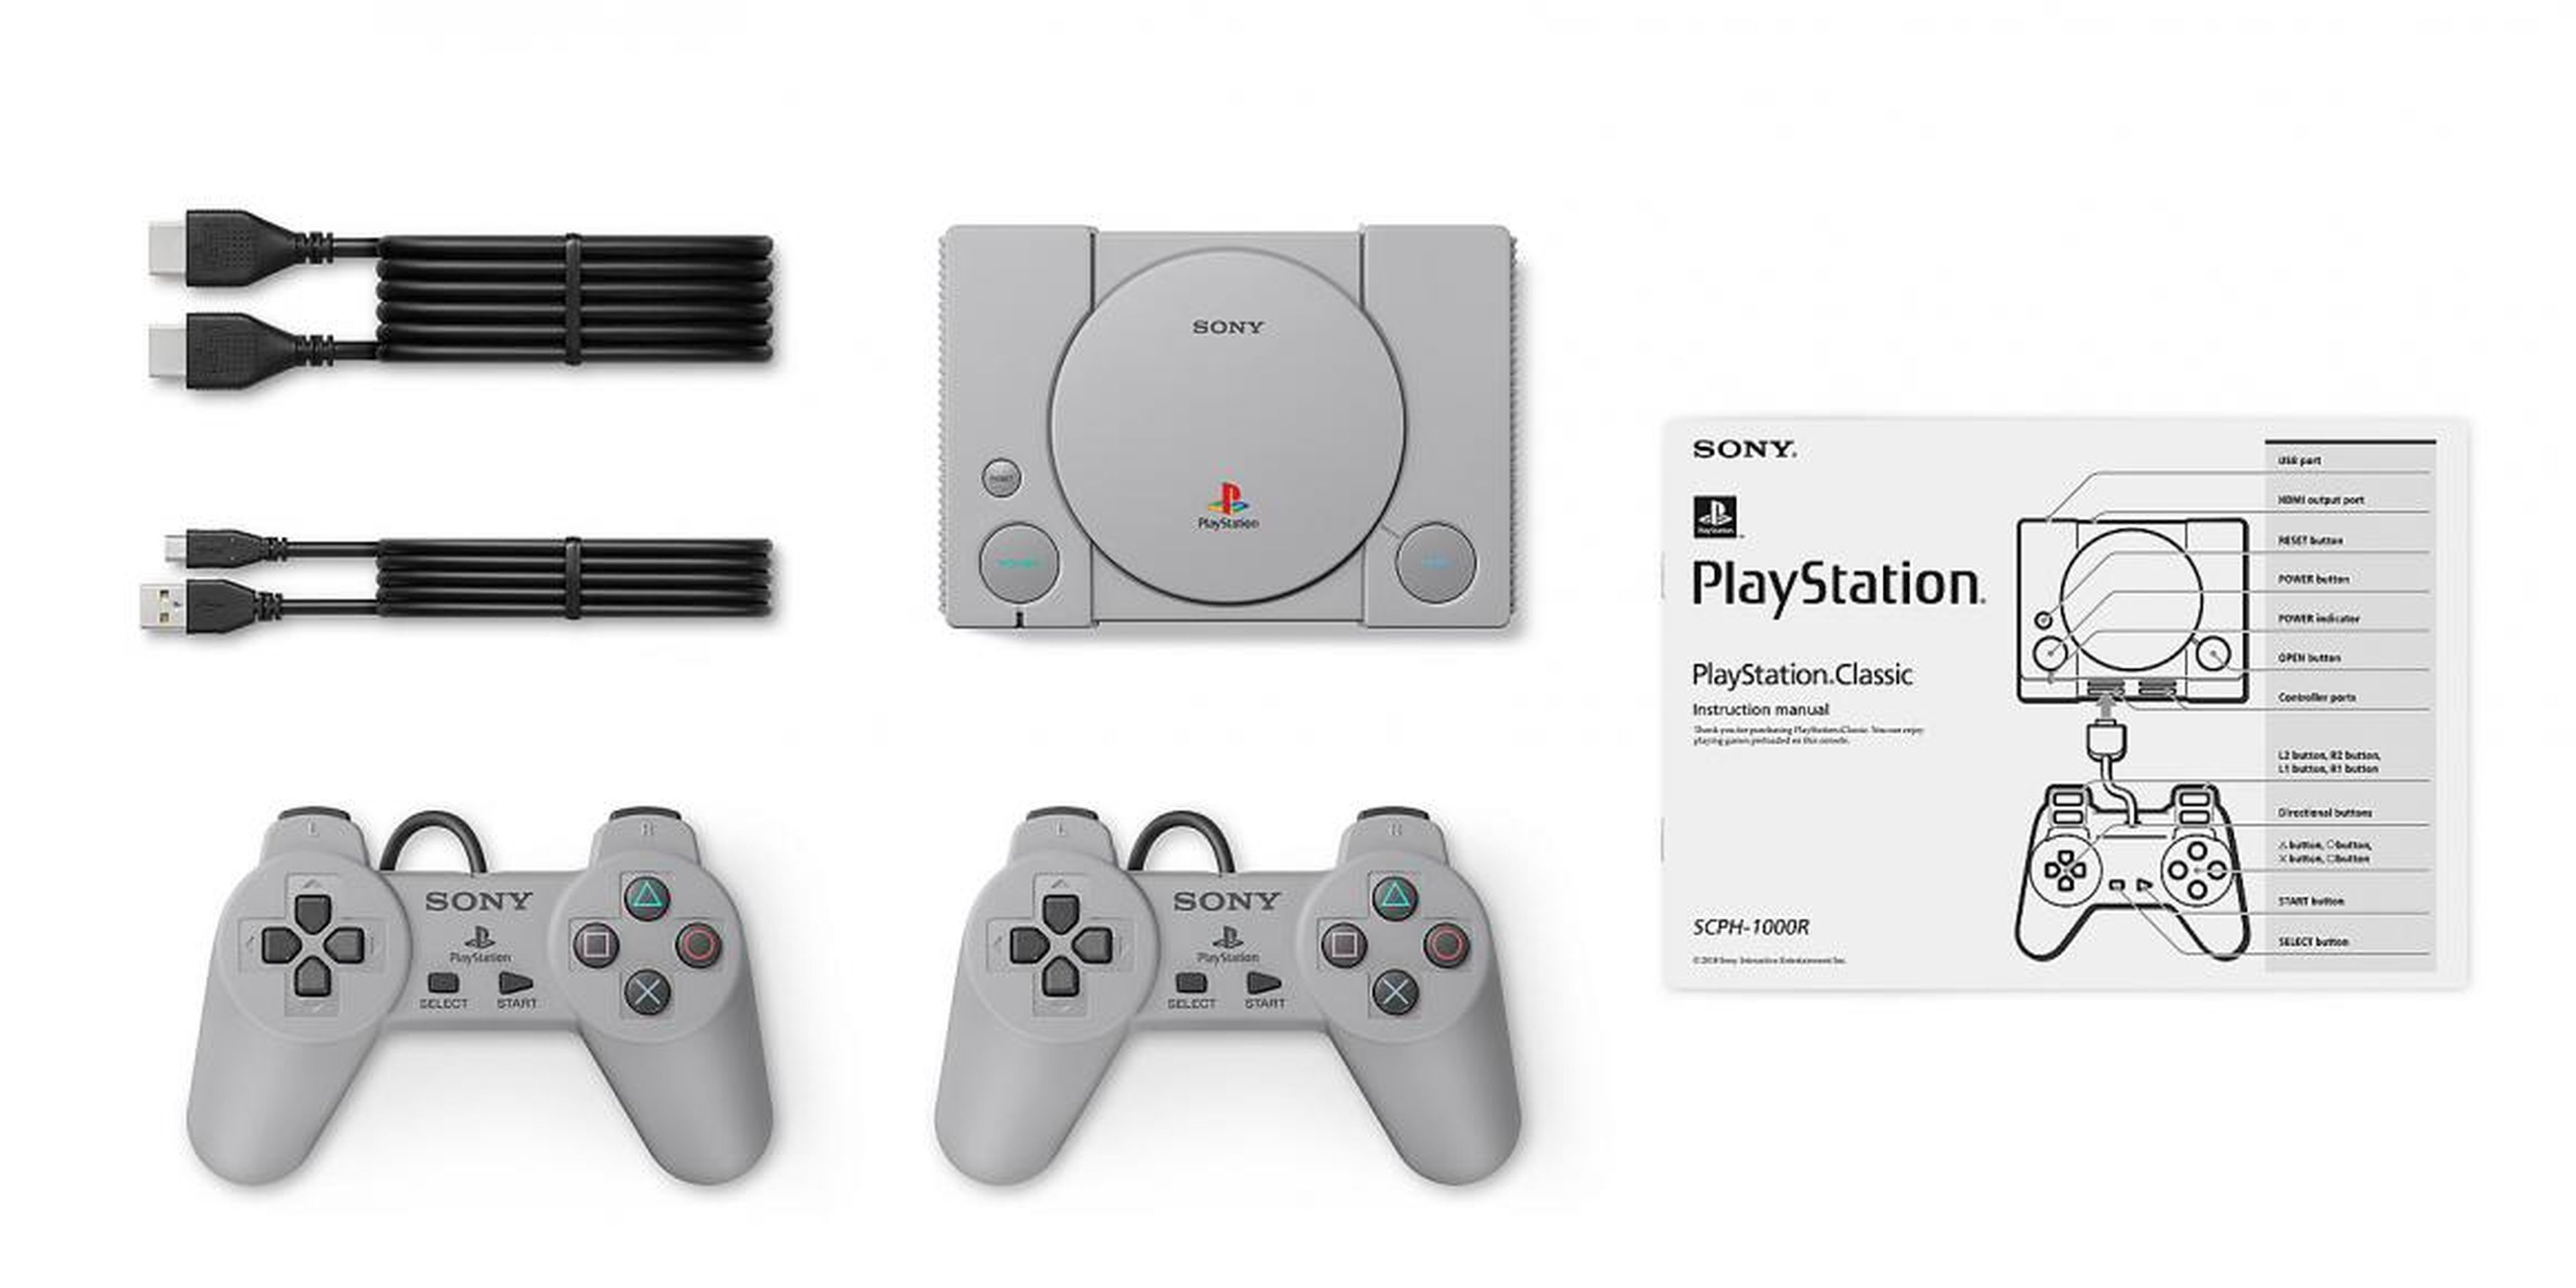 Everything that comes in the box: one HDMI cable, one micro USB cable, two PlayStation 1 replica gamepads, the PlayStation Classic console, and an instruction manual. Notably, there is no plug — you have to supply your own.